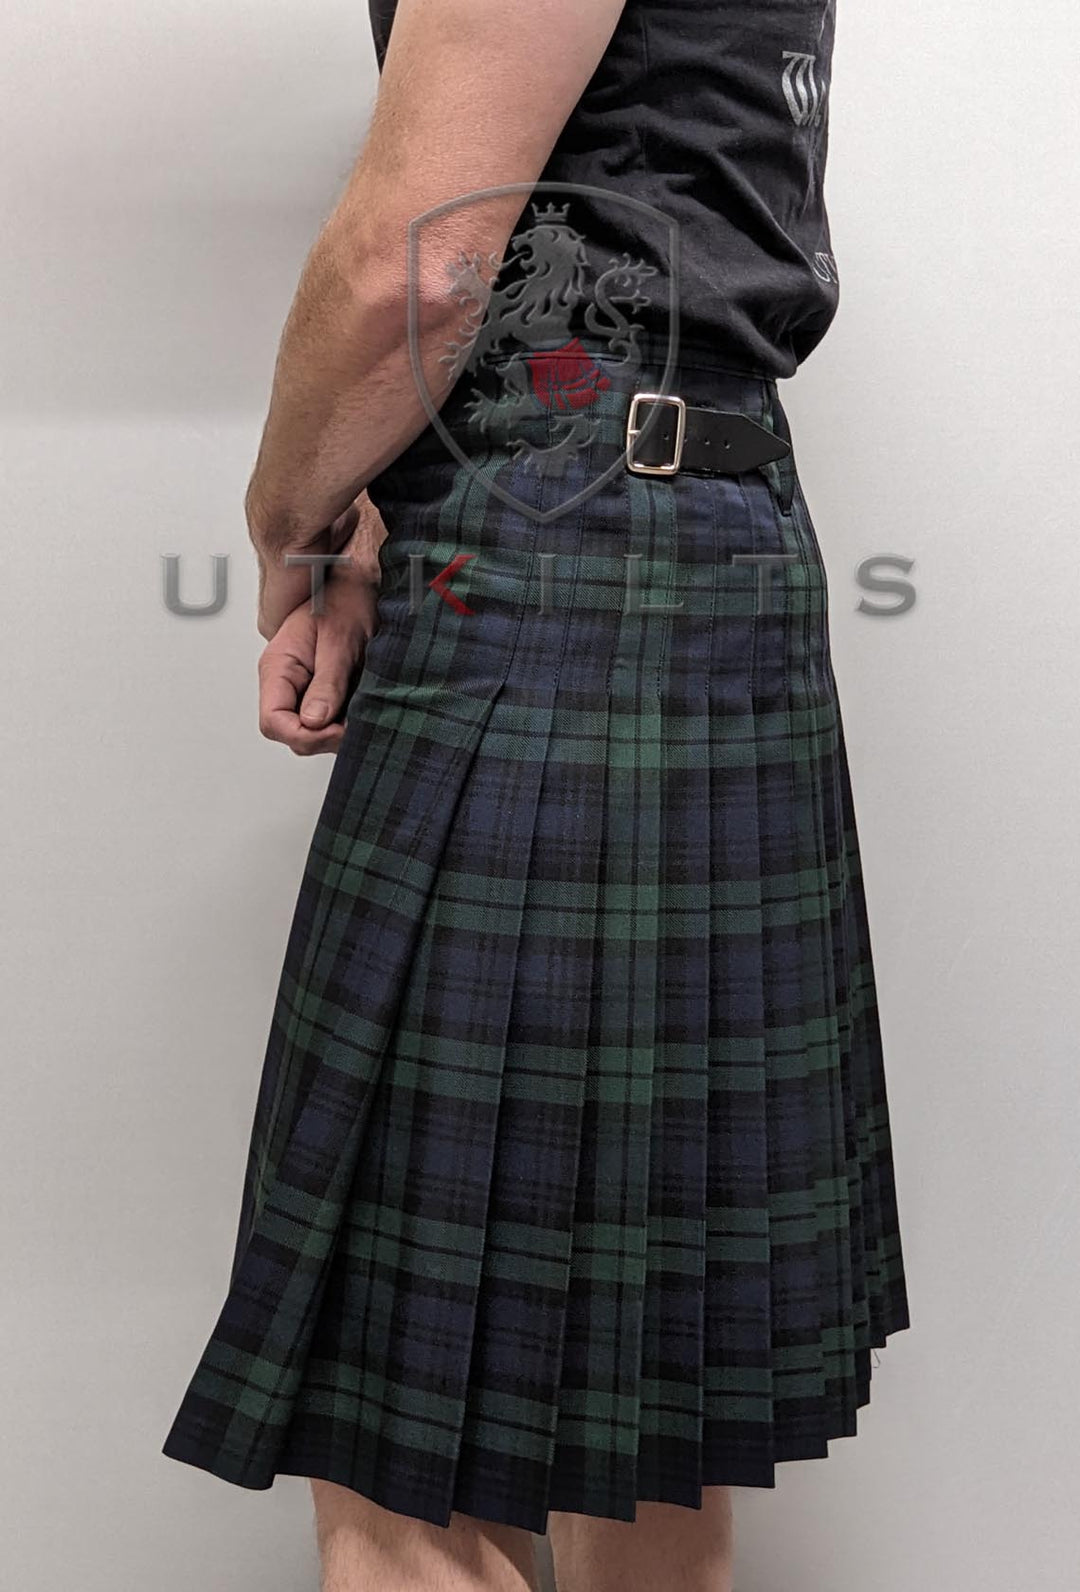 CLEARANCE! 5 Yard Made in Scotland Black Watch PV Tartan Kilt - Includes free Military Style Safety Kilt Pin - 36x24